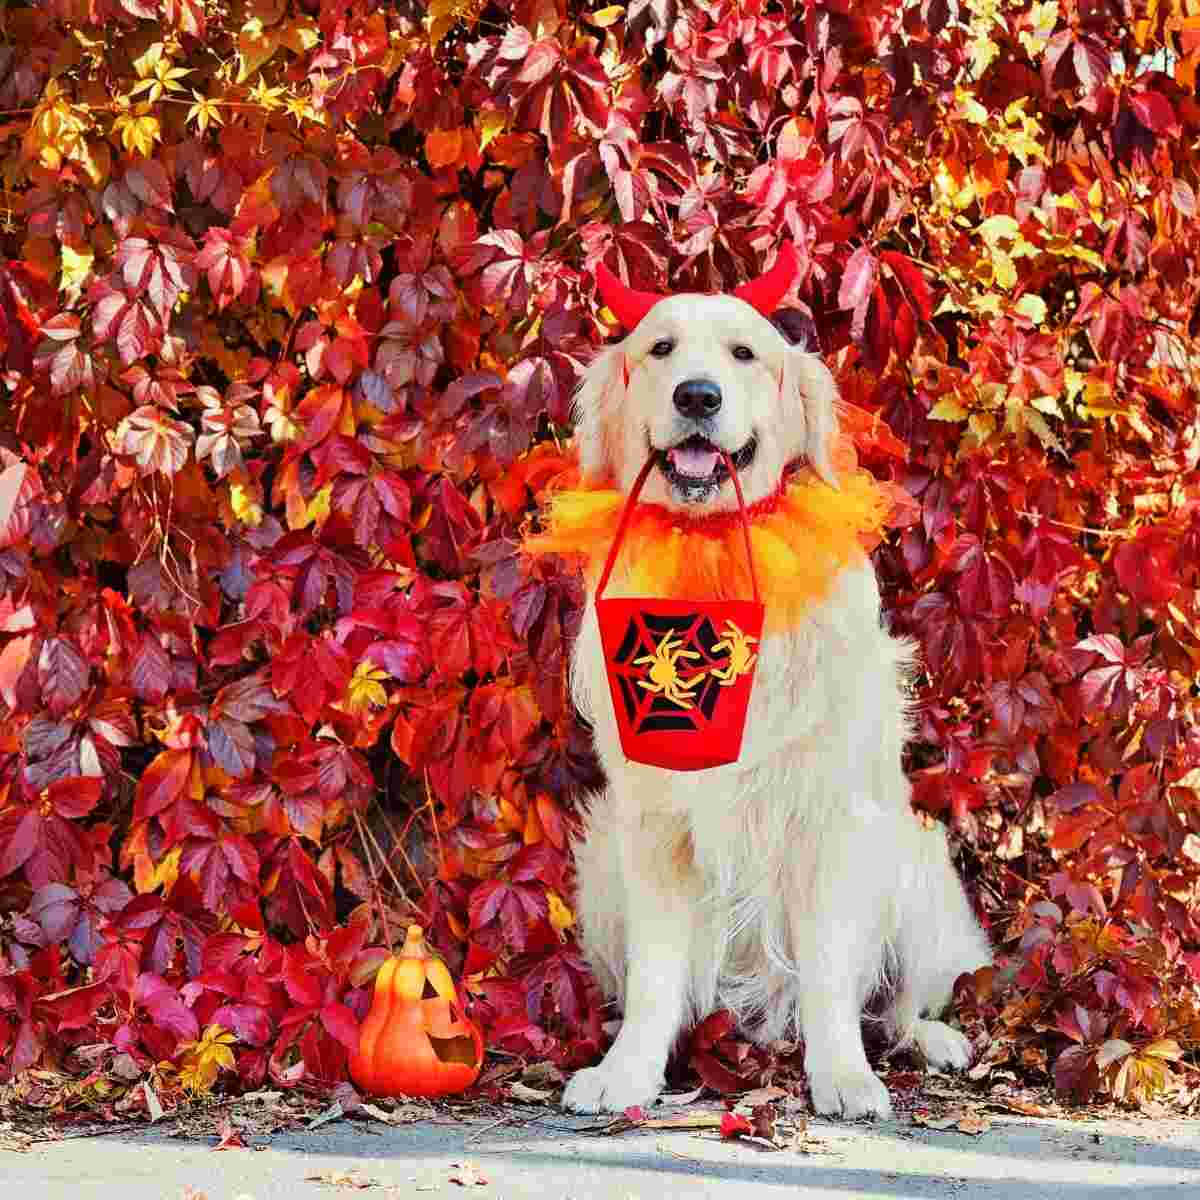 Golden Retriever surrounded by beautiful red and orage fall leaves, holding a Halloween candy bucket ready to go trick-o-treating.